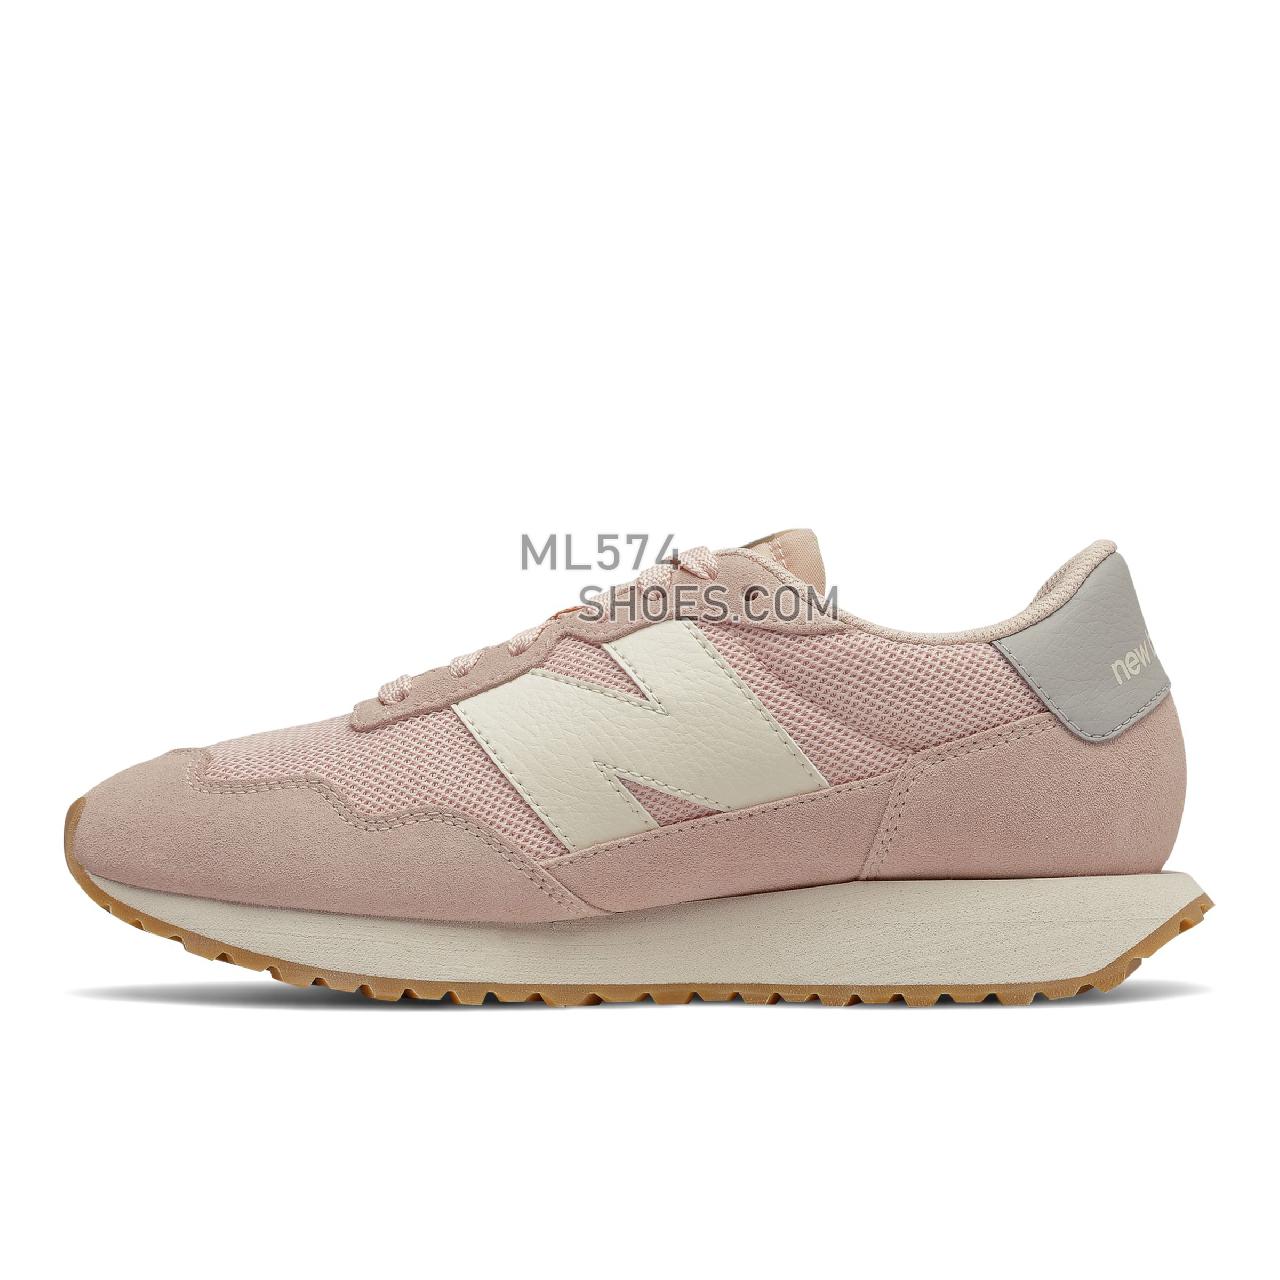 New Balance 237 - Women's Sport Style Sneakers - Oyster Pink with Storm Blue - WS237HL1